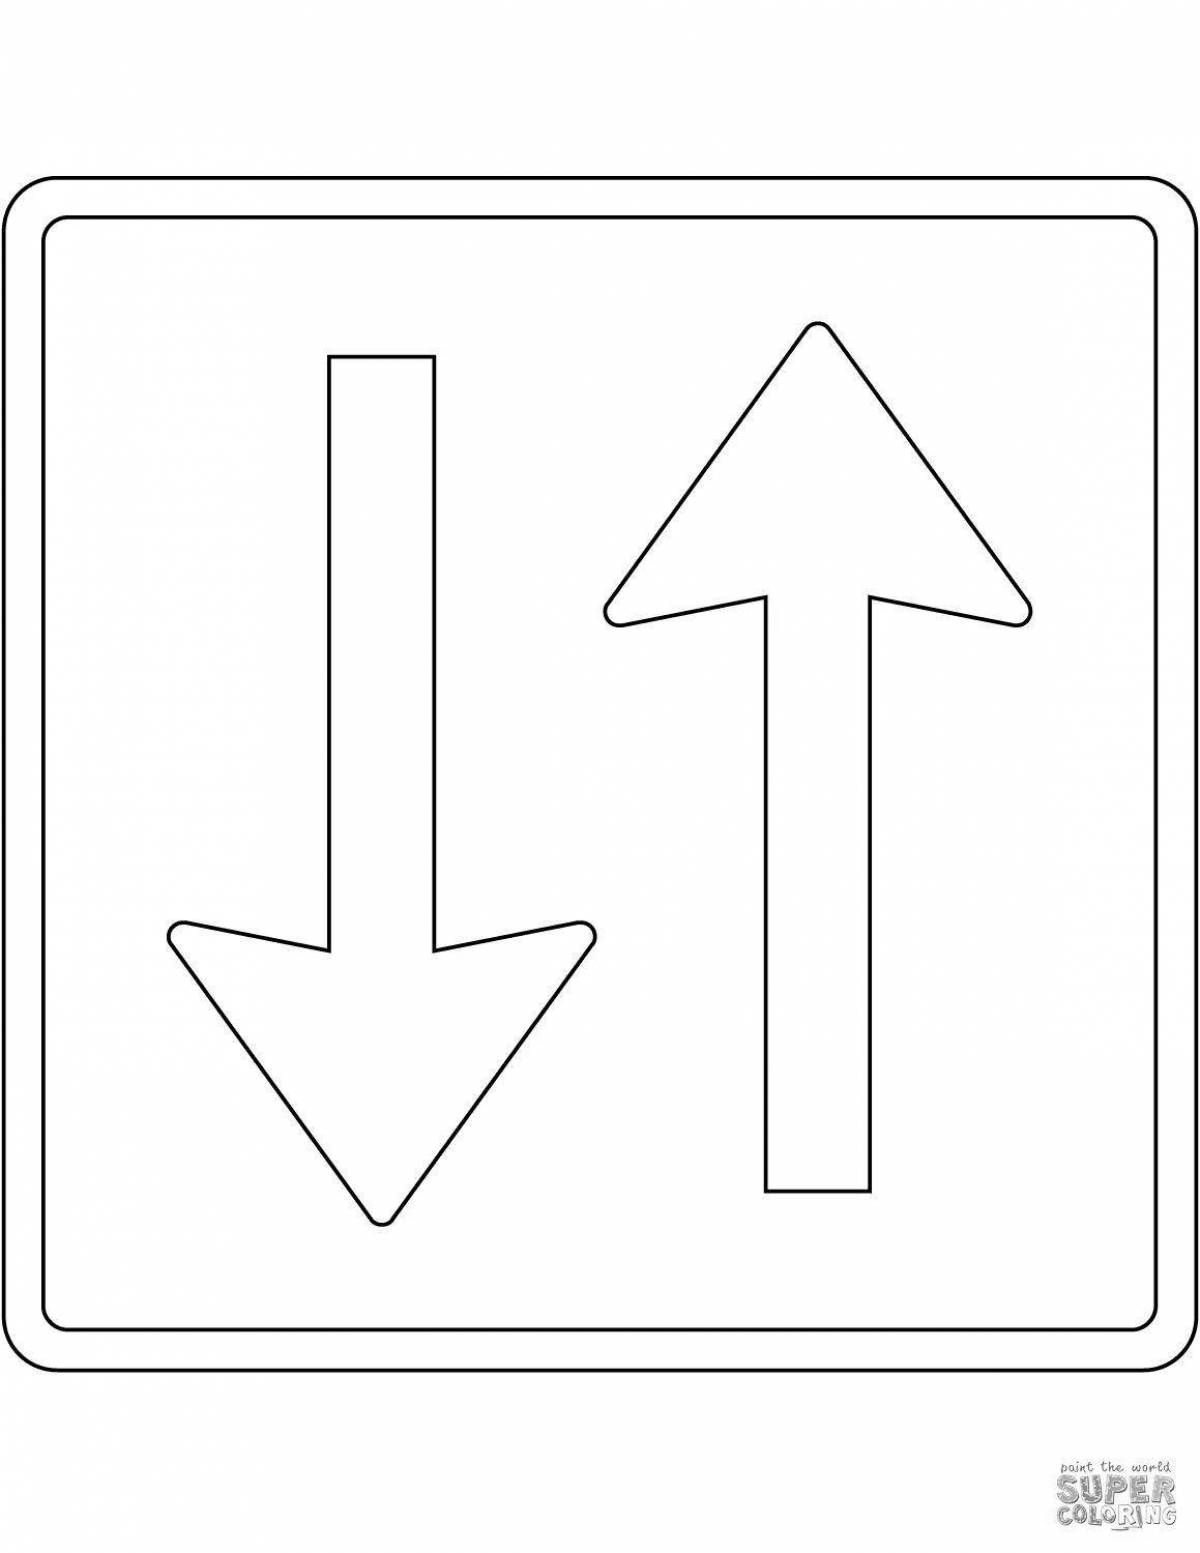 Coloring page shining road sign